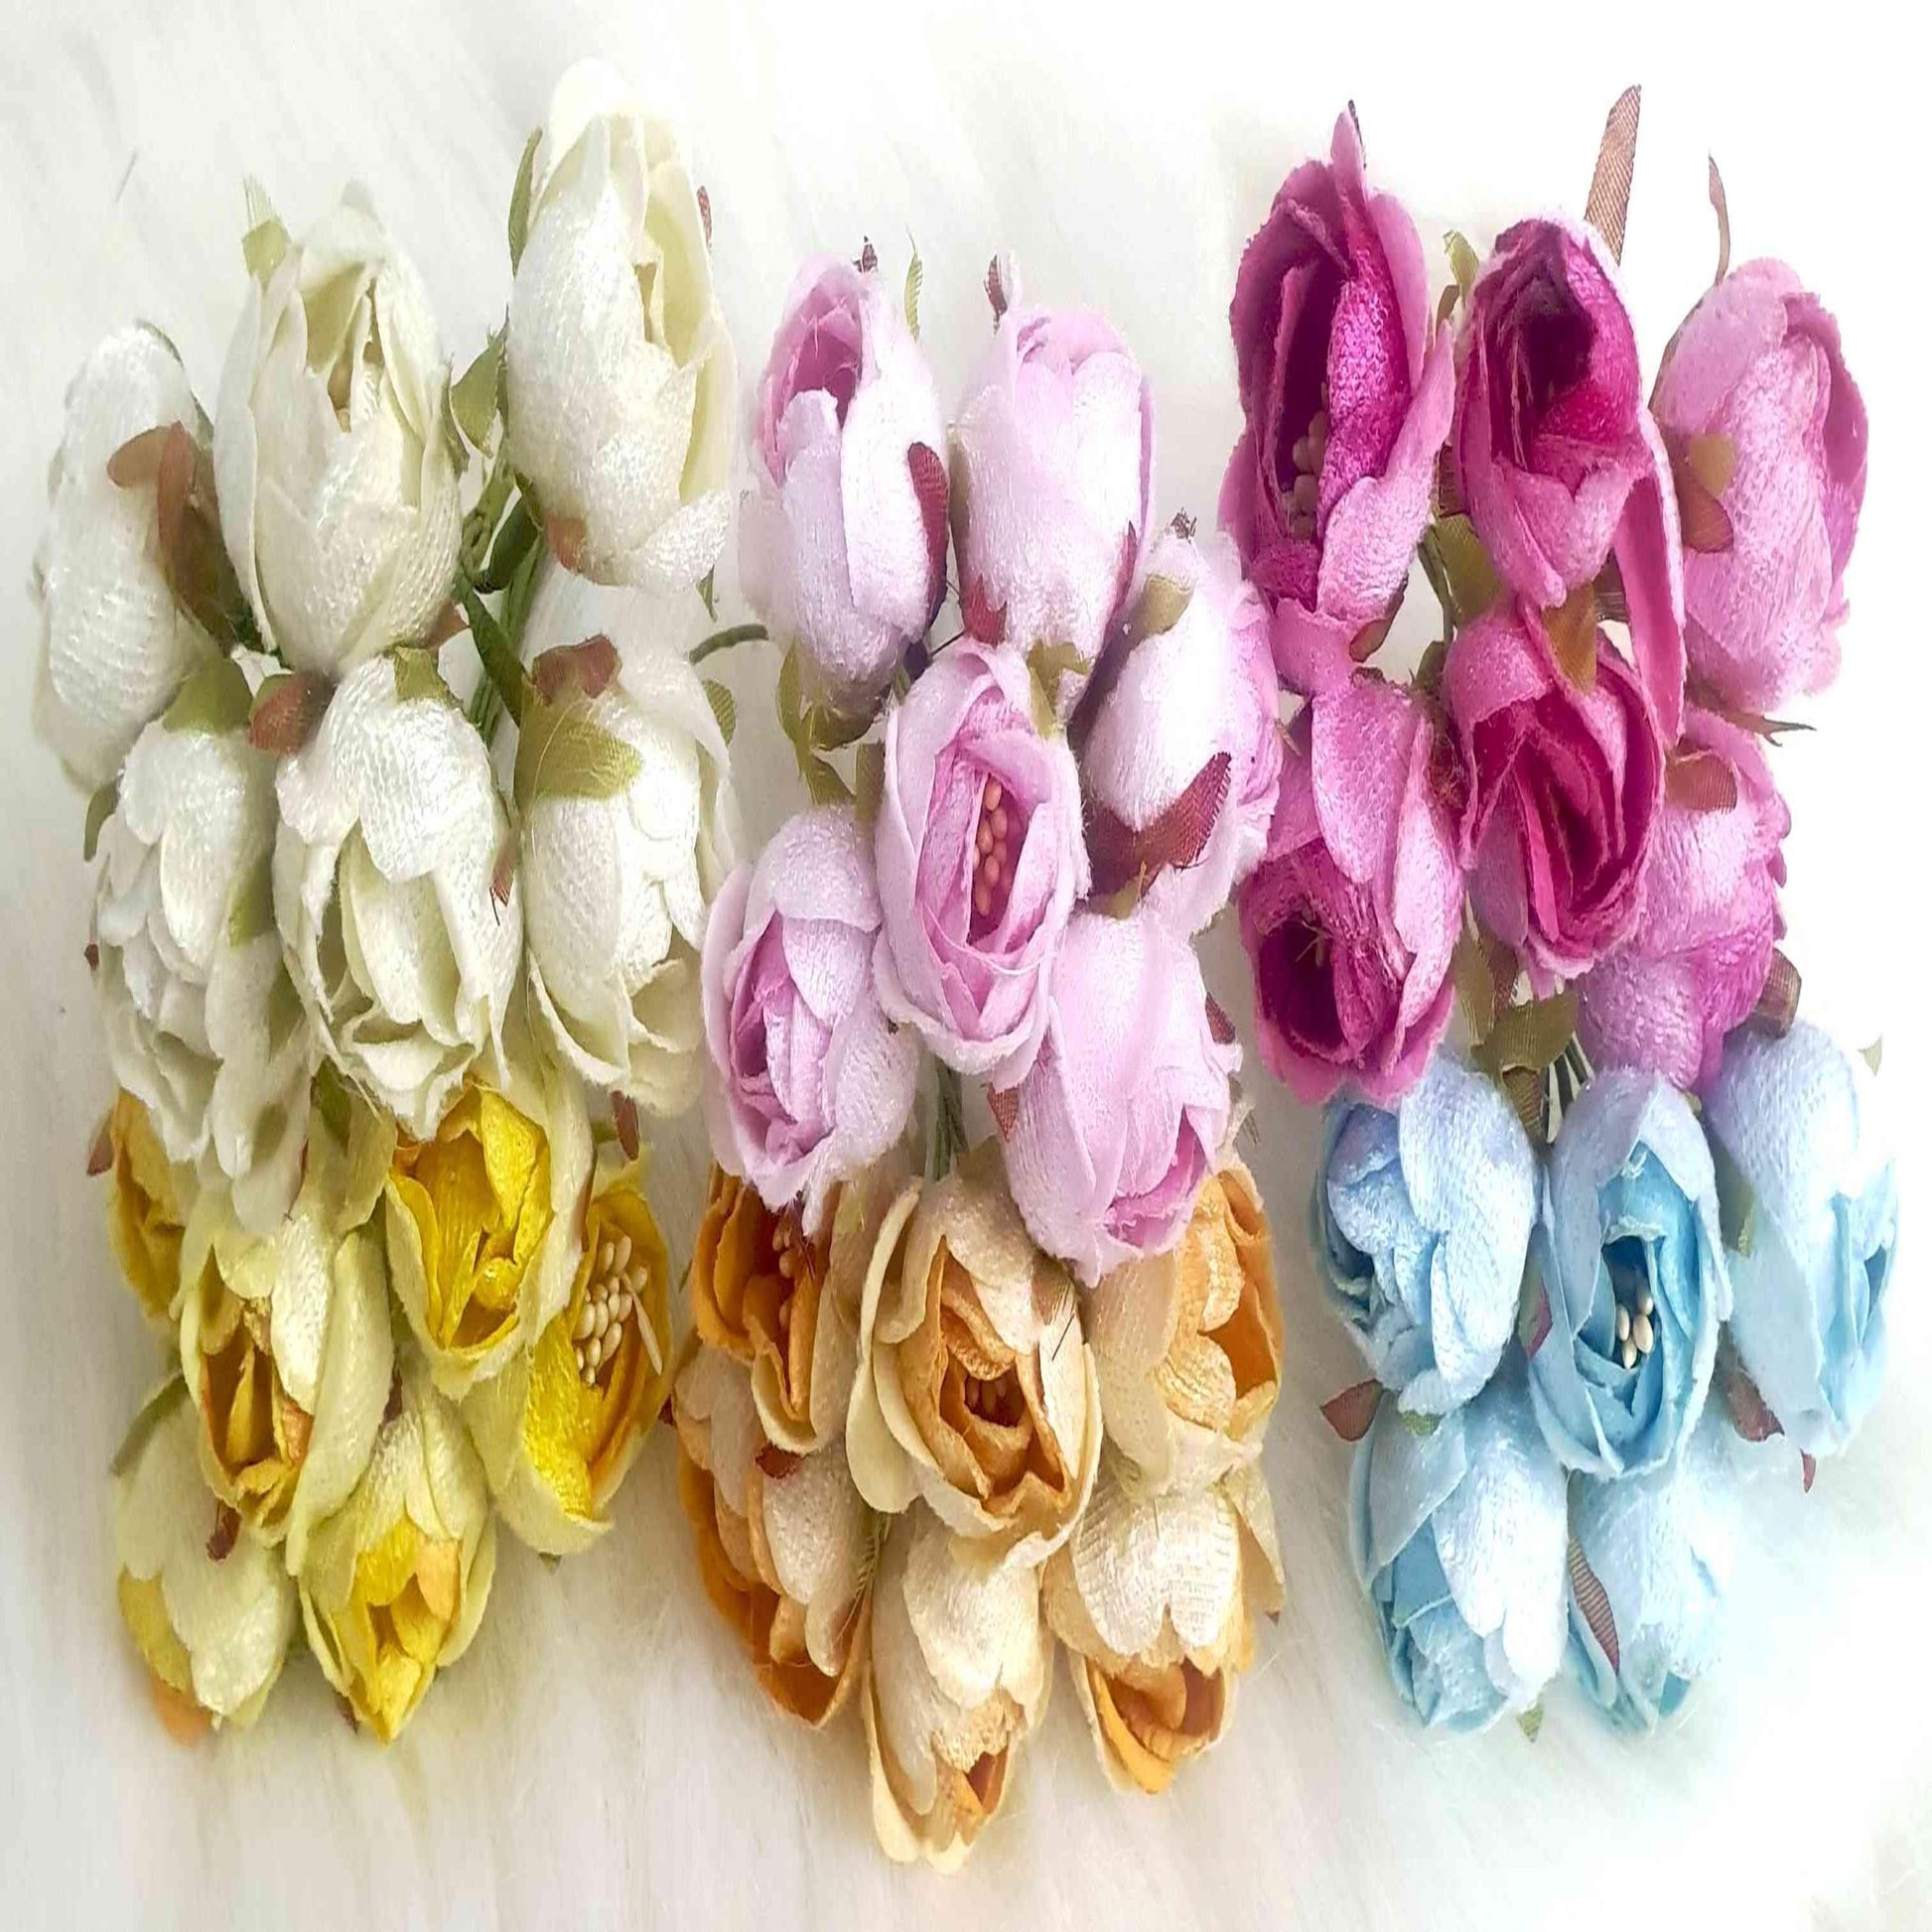 Indian Petals Beautiful Fabric Flowers with Buds for DIY Craft, Trouseau Packing or Decoration (Bunch of 12) - Design 26 - Indian Petals